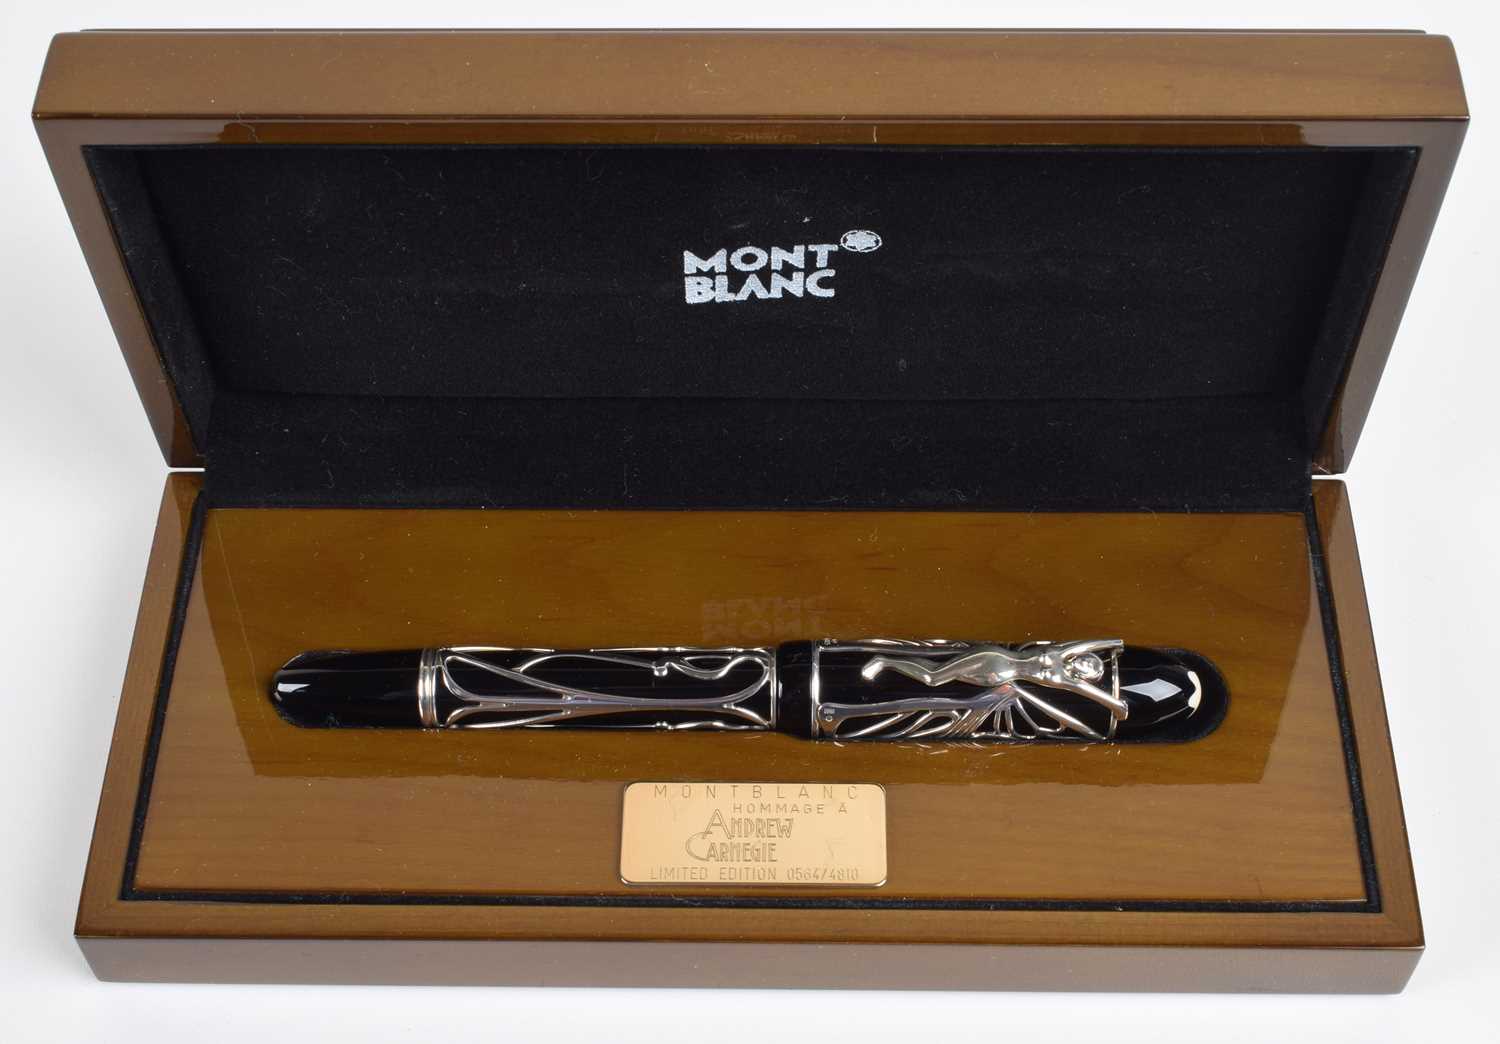 Lot 62 - Montblanc, Andrew Carnegie, limited edition fountain pen with box and certificate.